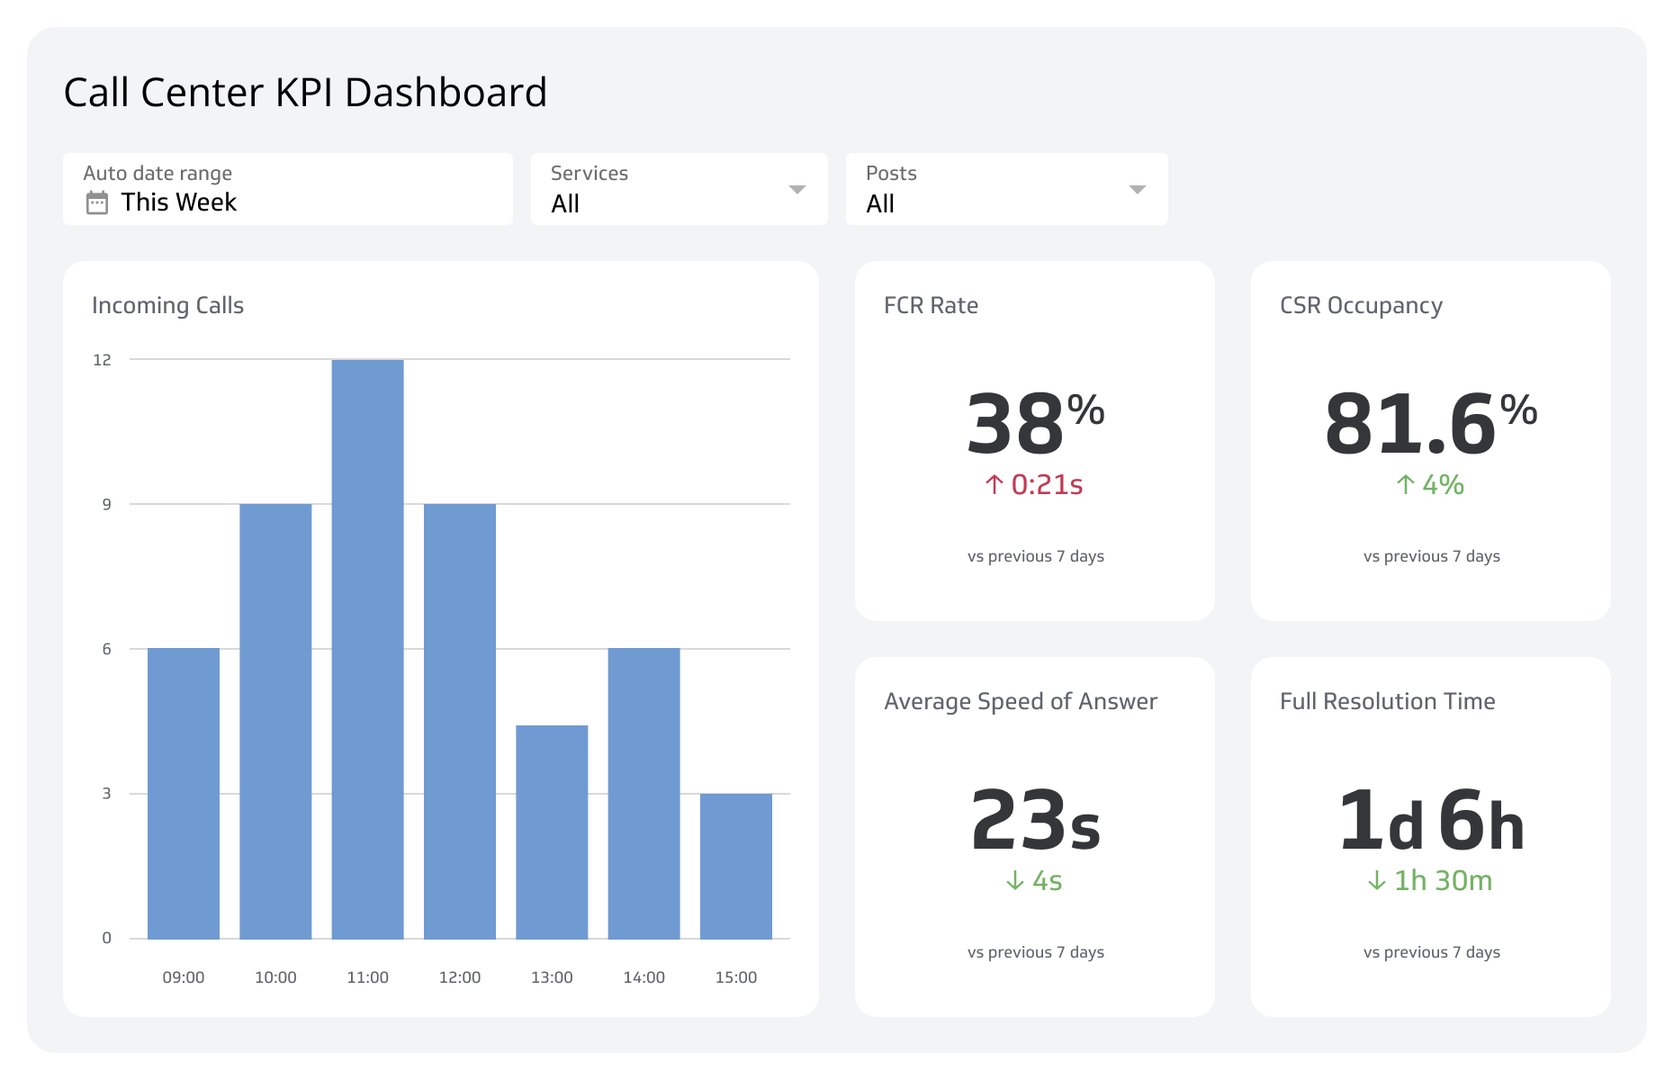 Related Dashboard Examples - Call Center KPI Dashboard